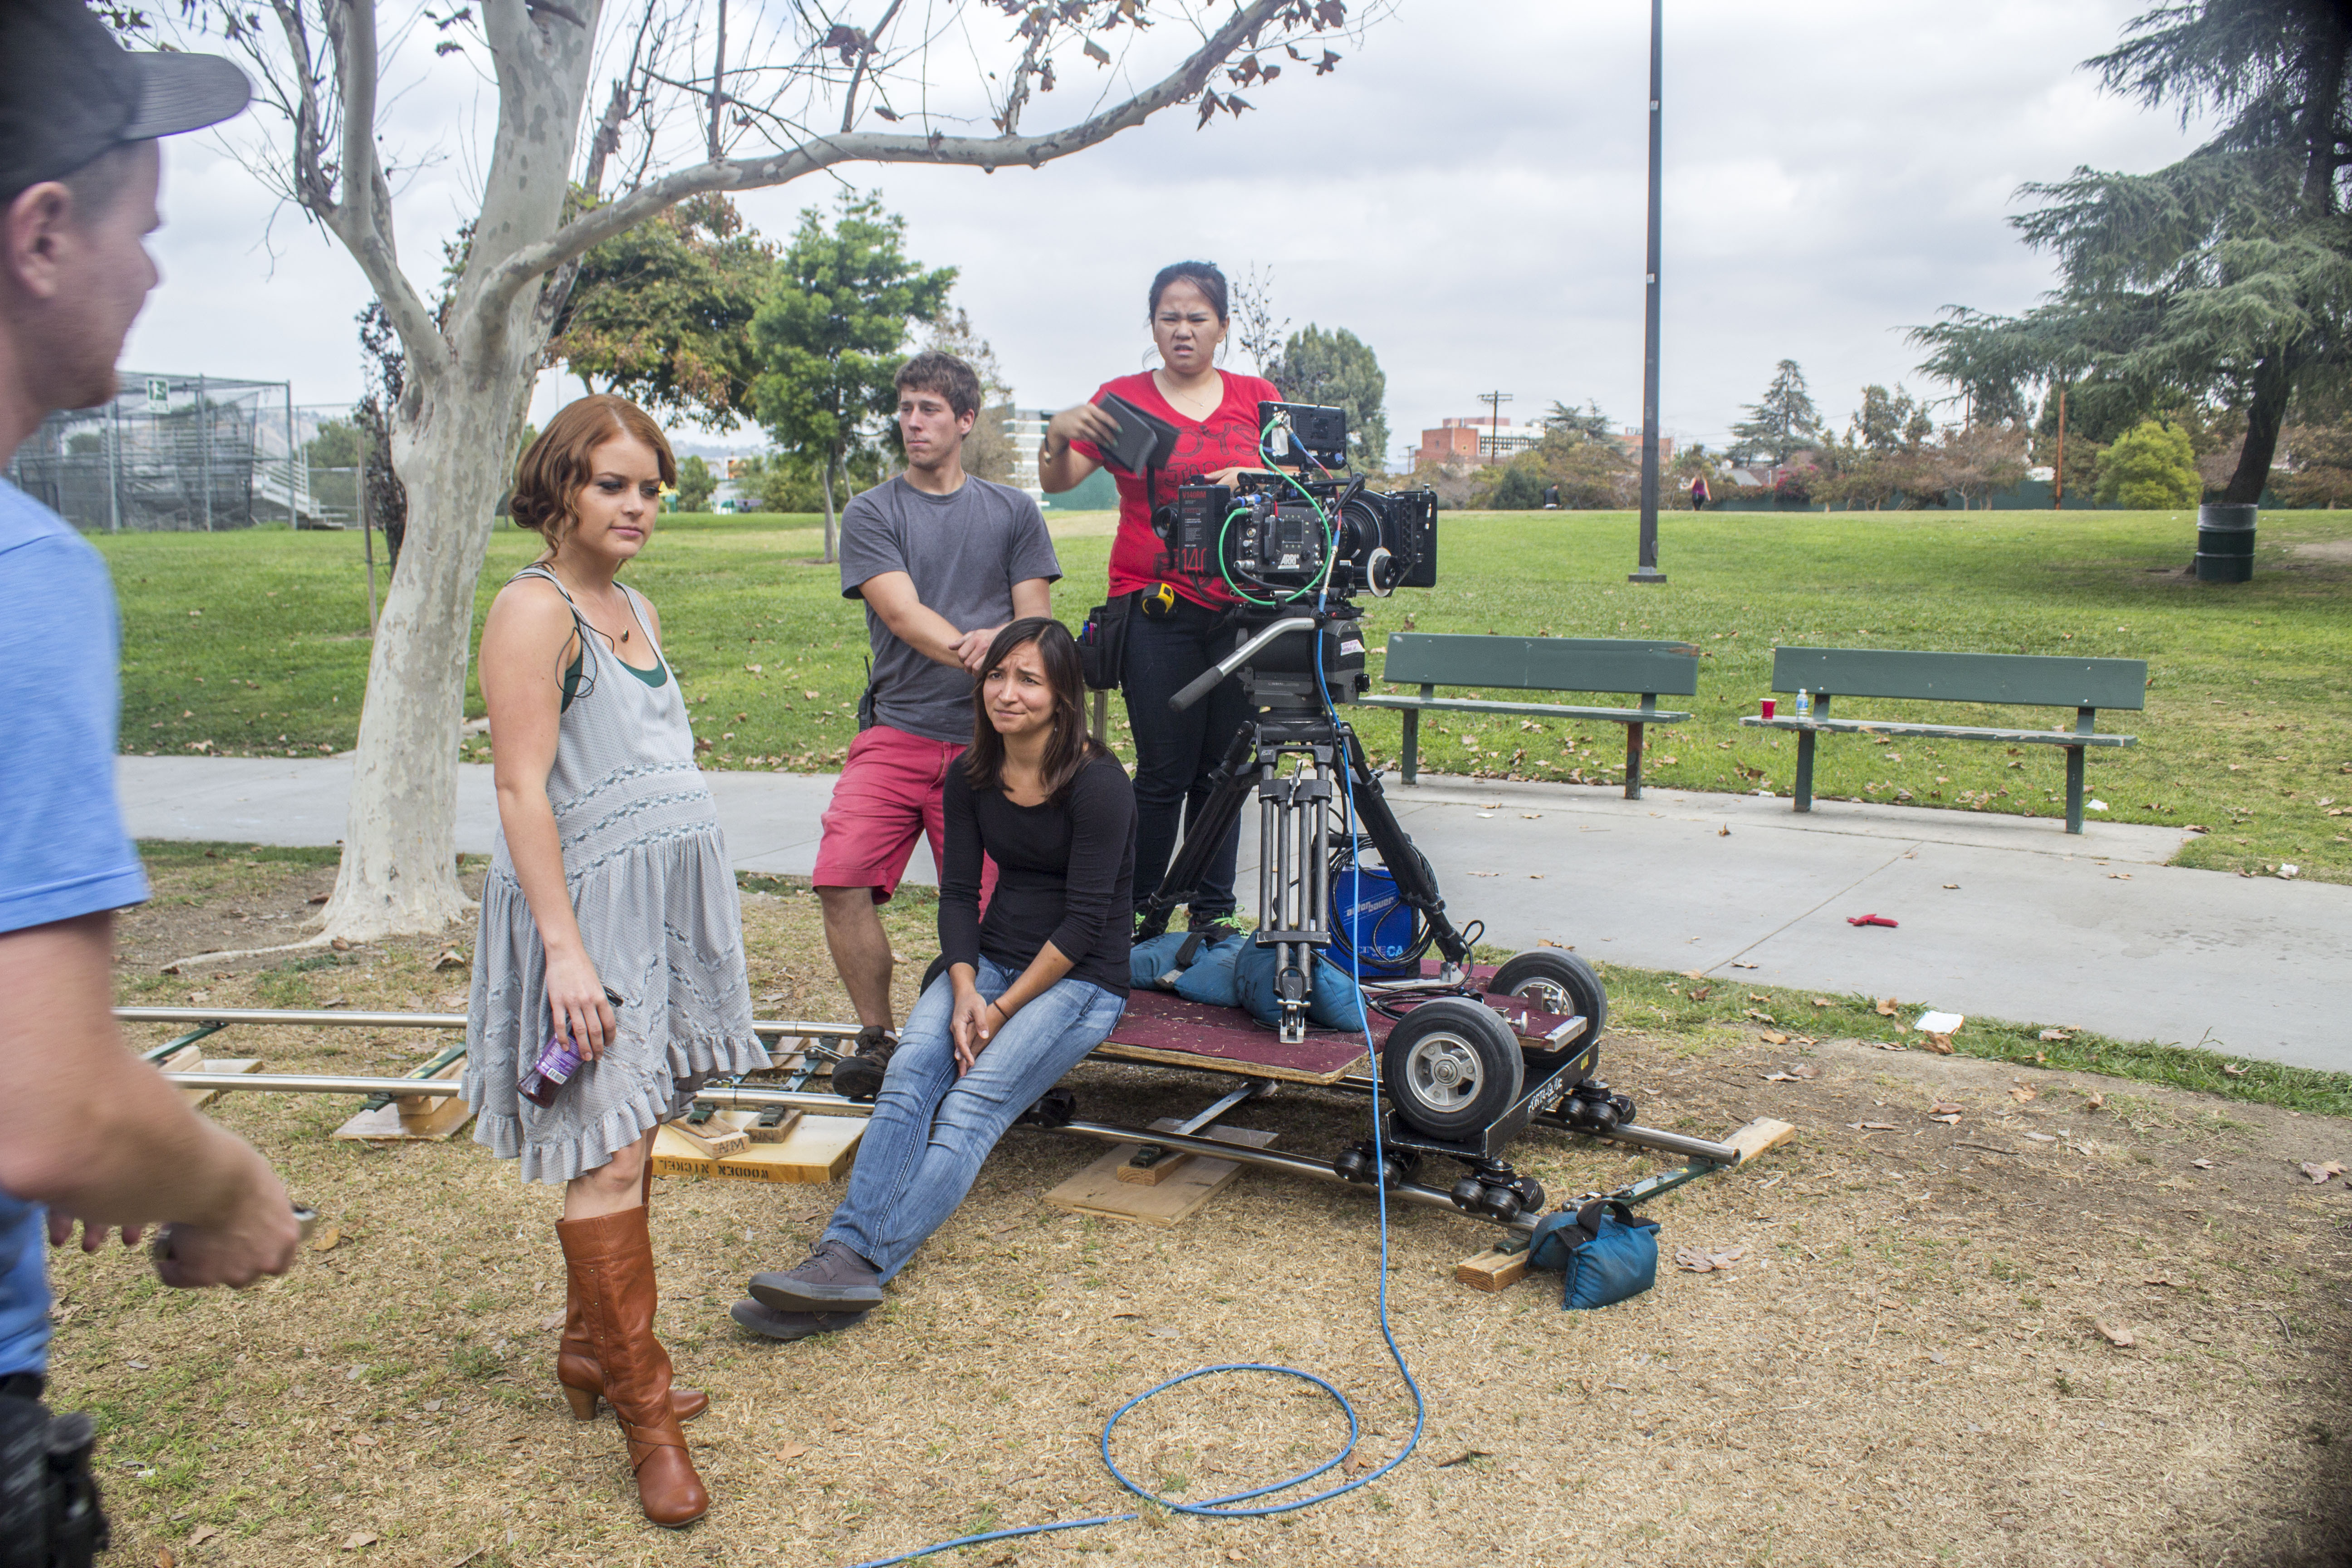 Director Sarah Phillips talks through a scene with Director of Photography Olivia Kuan and the crew.